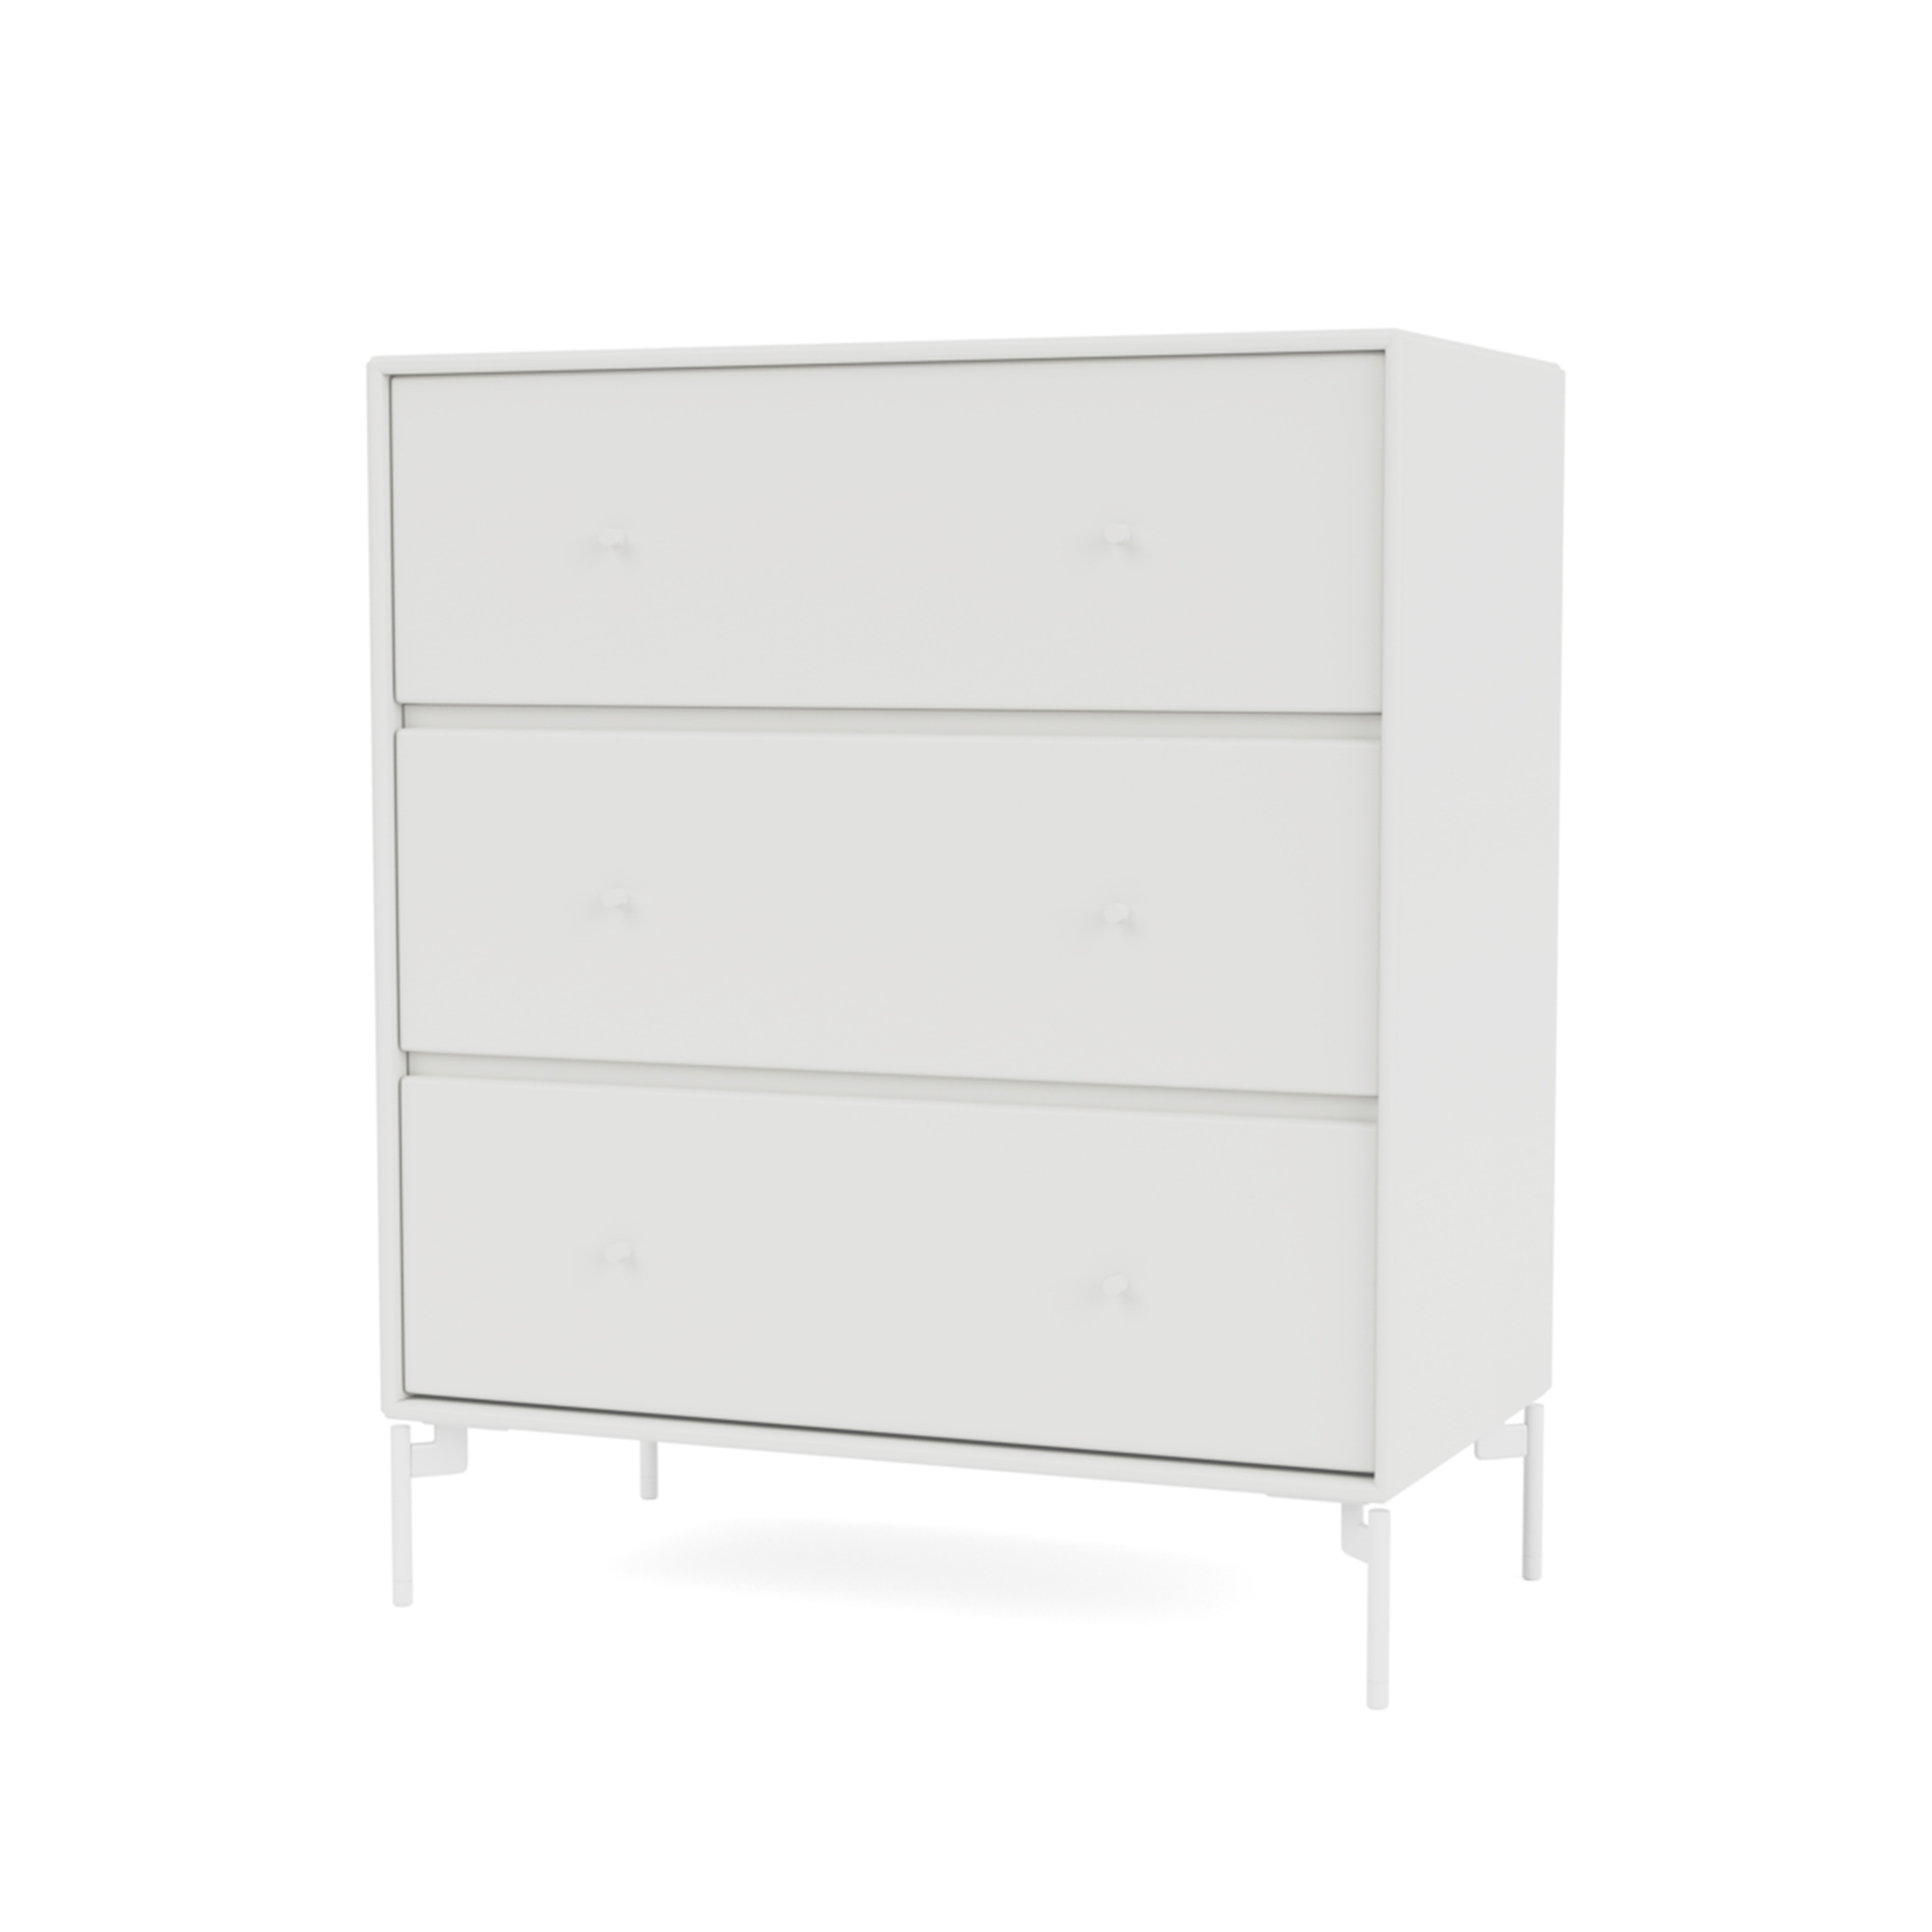 MONTANA // CARRY - CHEST OF DRAWERS WITH 3 DRAWERS | 01 WHITE | LEG COLOR : SNOW